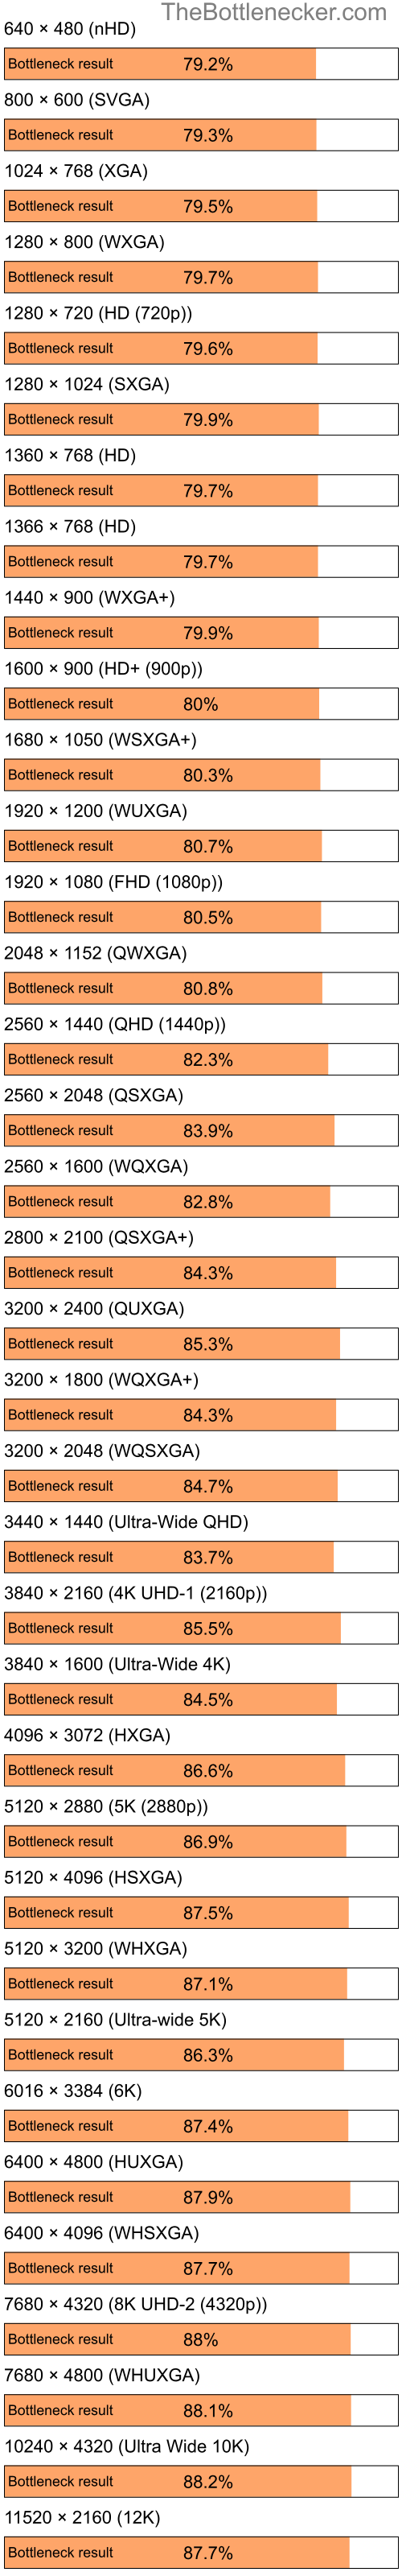 Bottleneck results by resolution for Intel Pentium 4 and NVIDIA GeForce 6200 LE in General Tasks